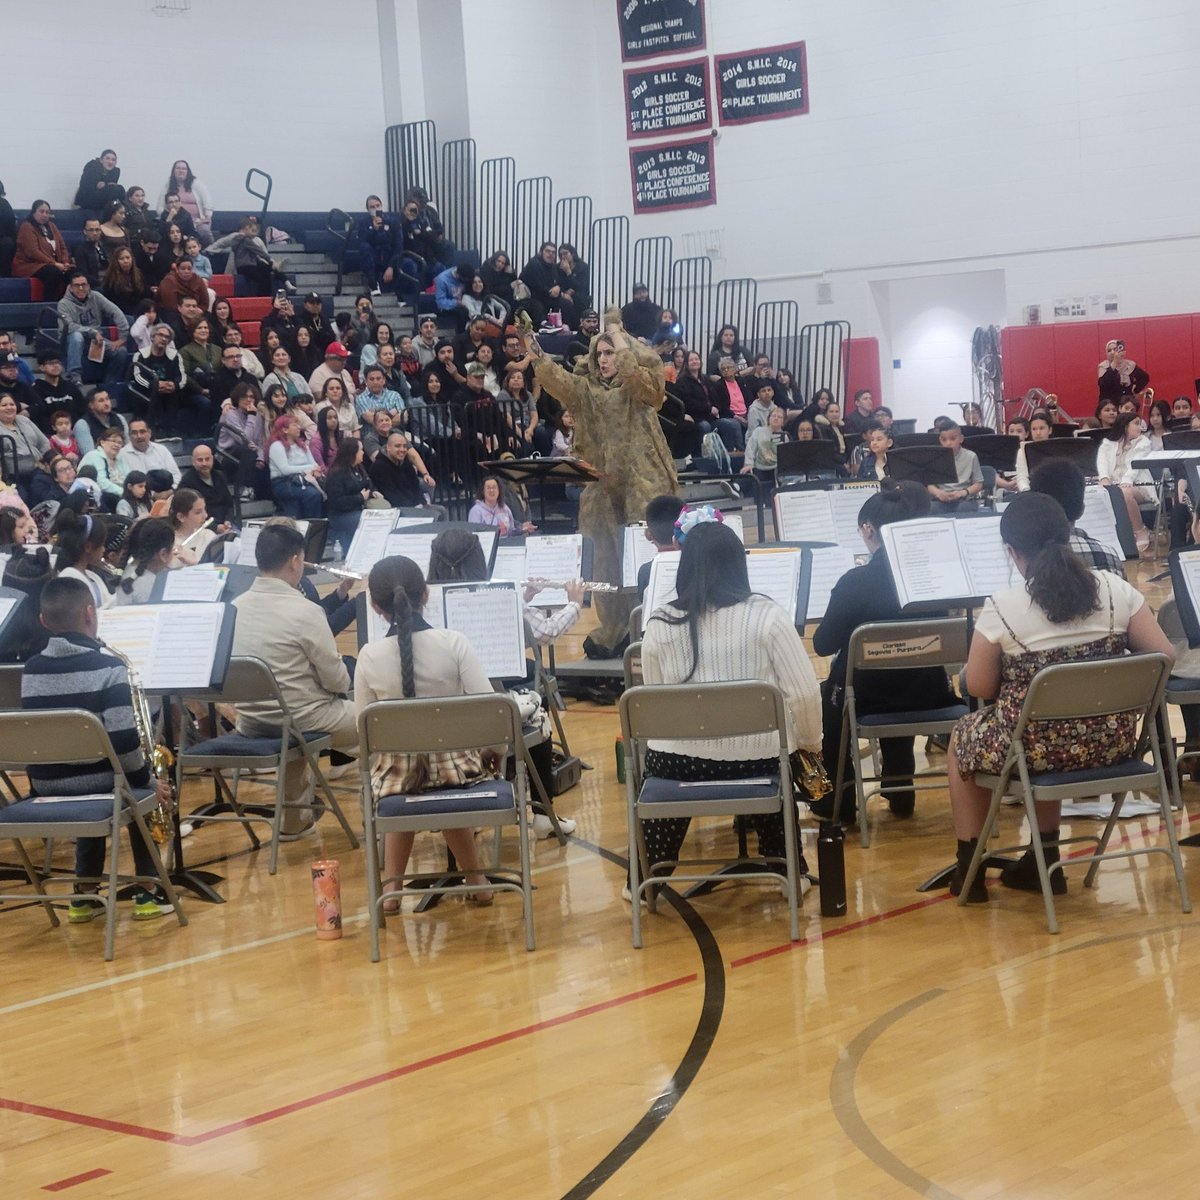 Awesome band concert by BSD111'S Beginning Band. I spotted my talented Mustangs! Congratulations to the students and band directors!🤠🎹🎷#fbmccordmustangs #burbank111